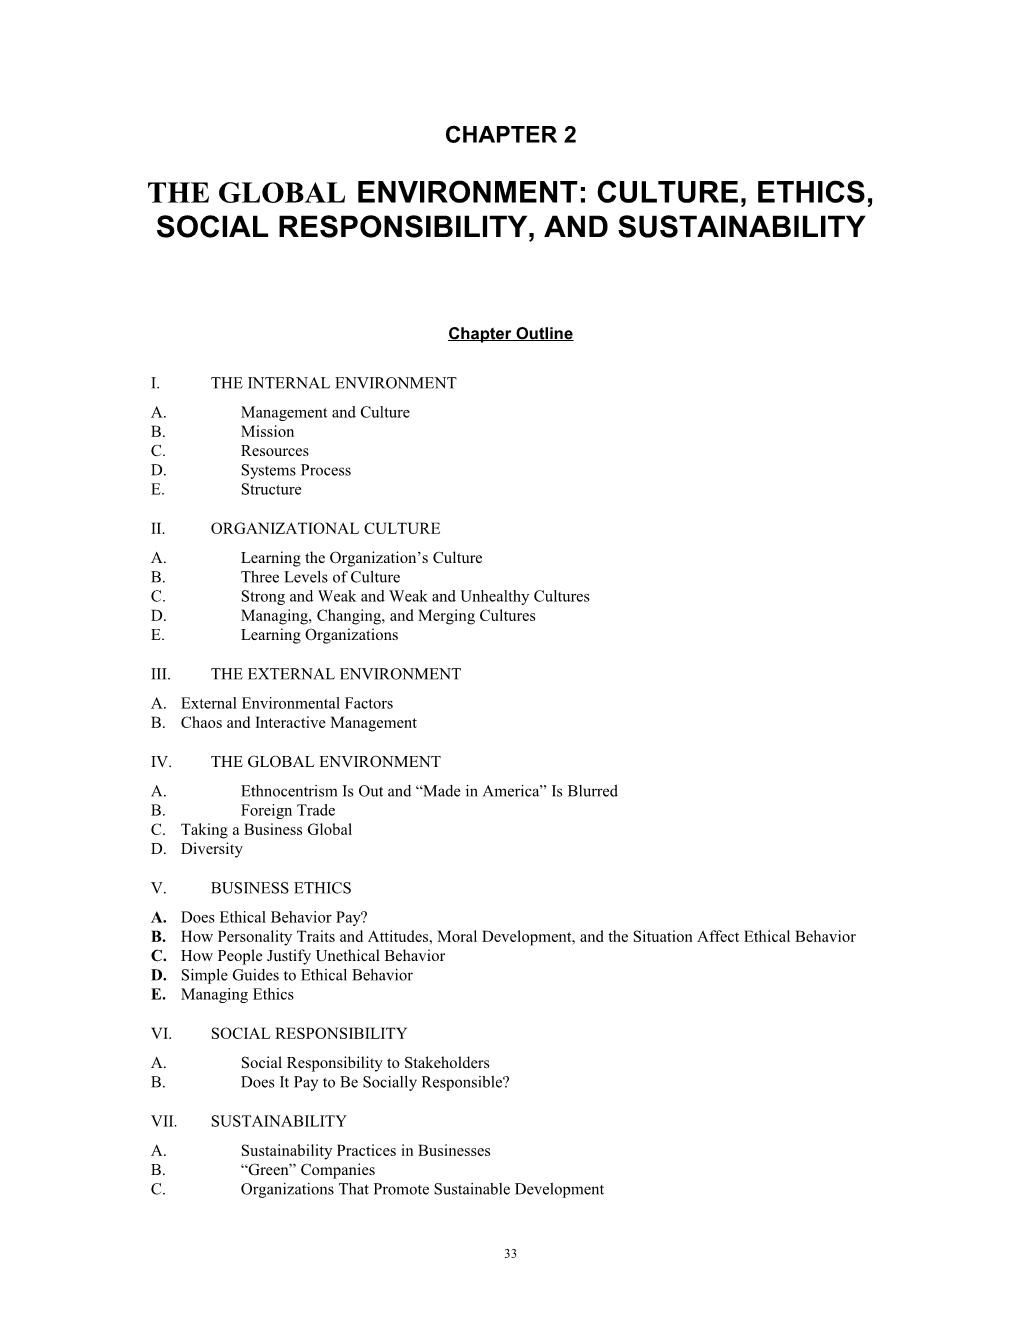 The Globalenvironment: Culture, Ethics, Social Responsibility, and Sustainability